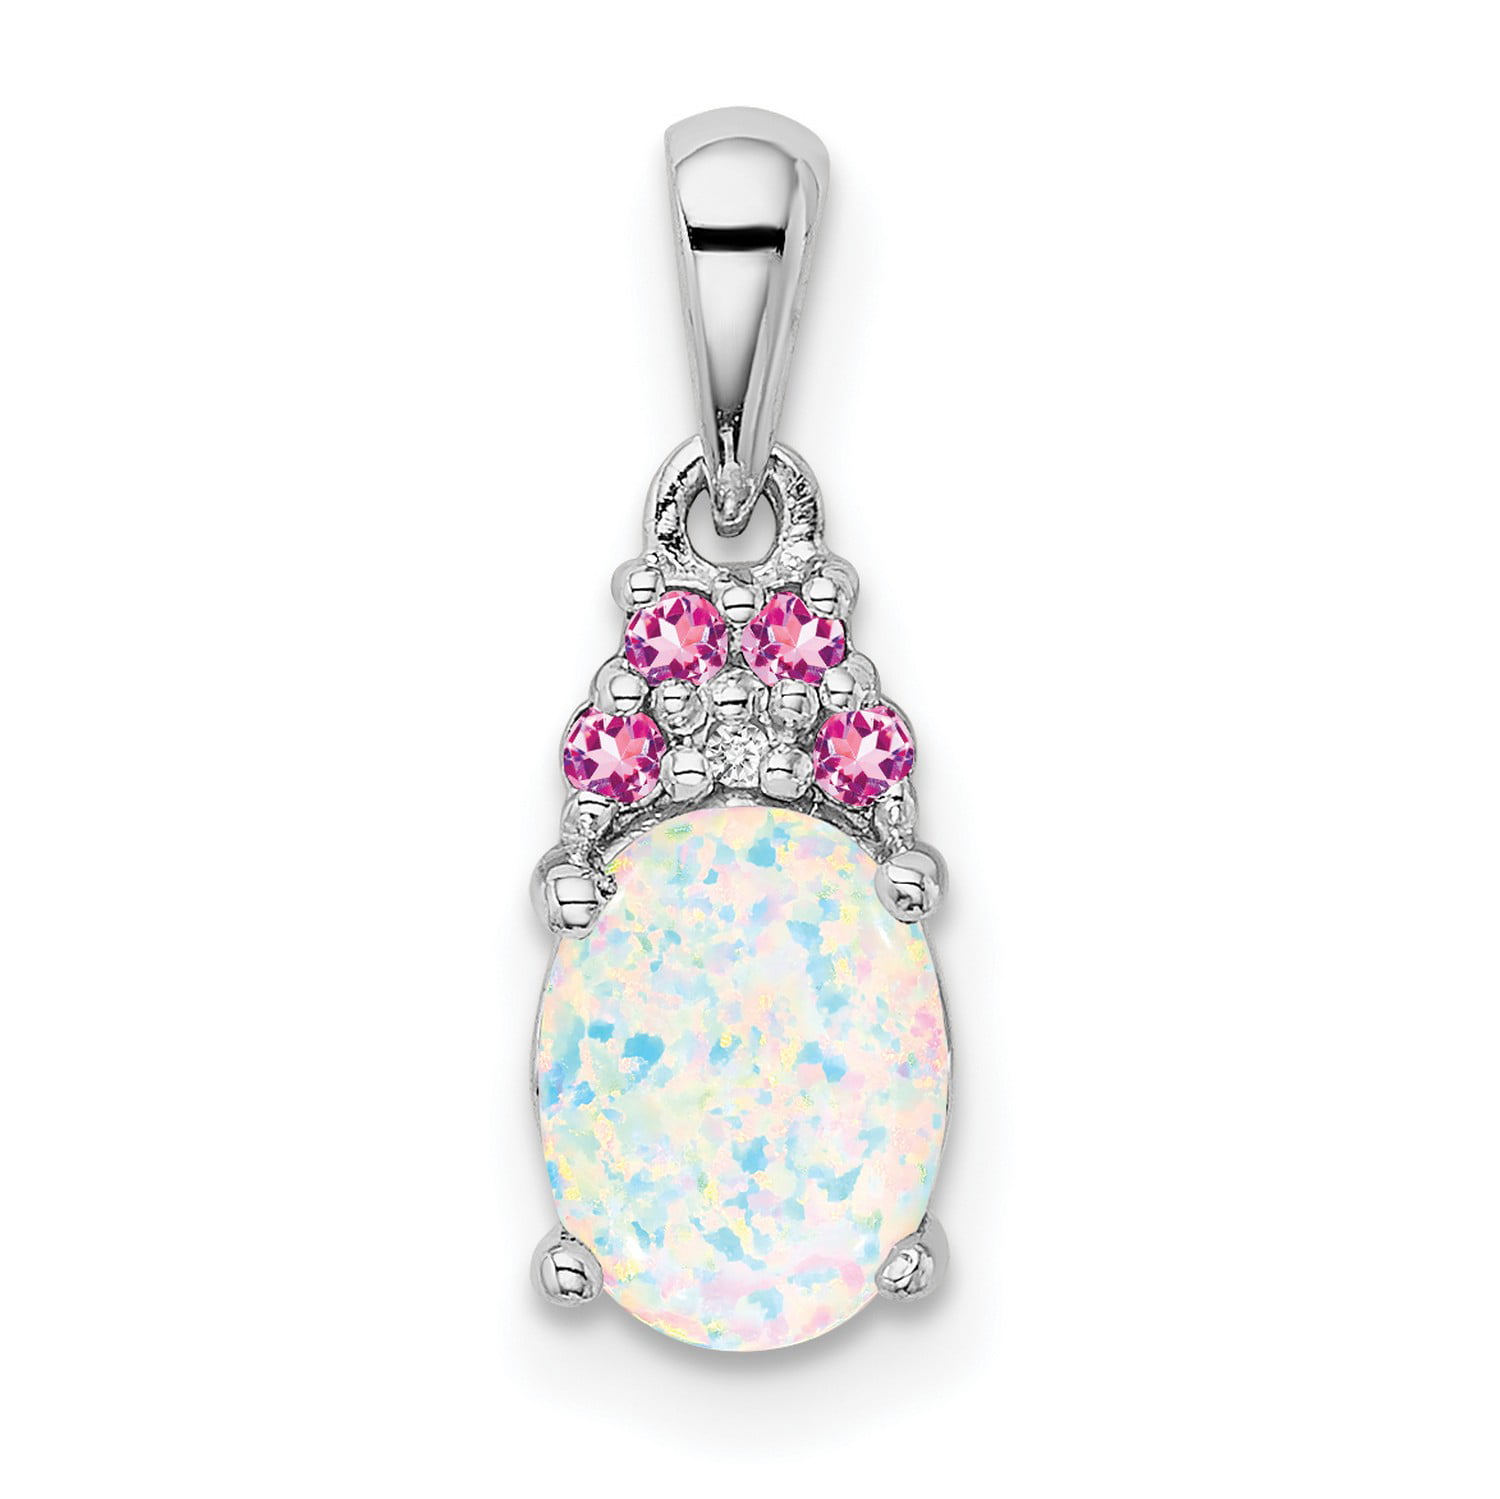 Solid Sterling Silver Rhodium Plated 7 Millimeter Neon Pink Simulated Opal Pendant Necklace